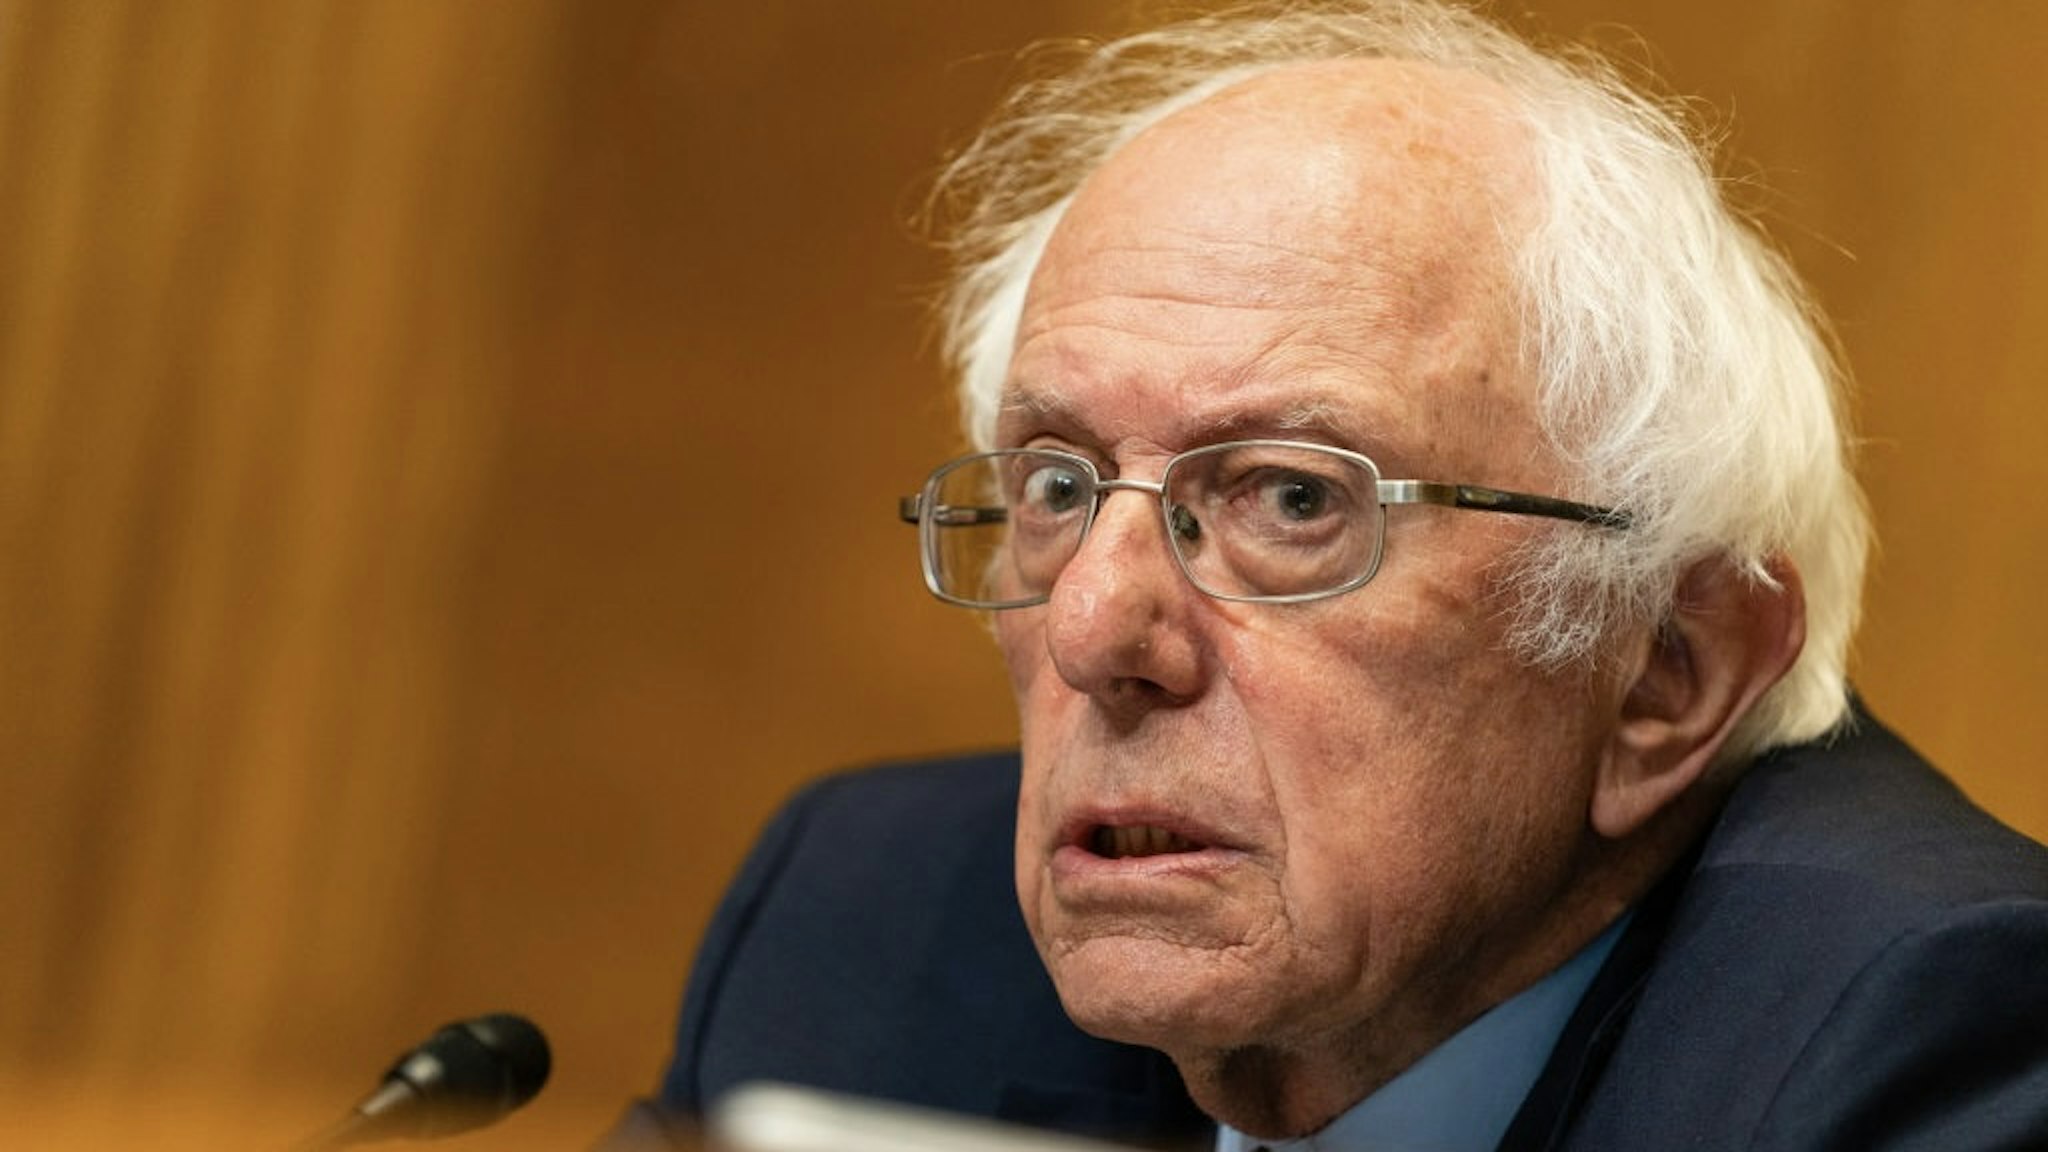 Senator Bernie Sanders, an independent from Vermont and chairman of the Senate Budget Committee, speaks during a hearing in Washington, D.C., U.S., on Thursday, May 5, 2022.